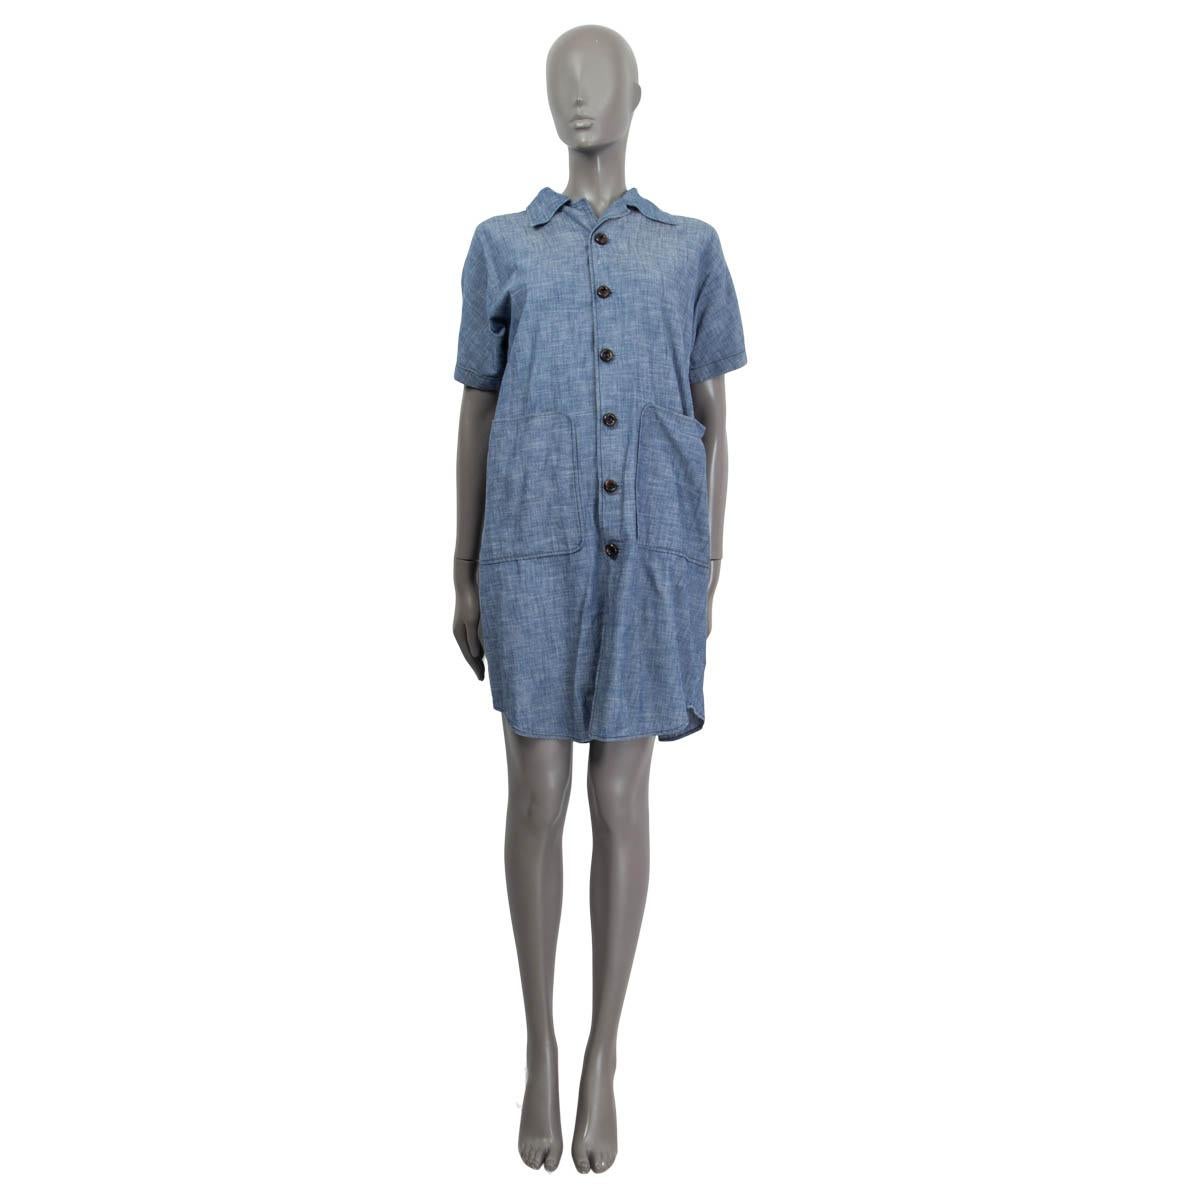 100% authentic Dsquared2 denim dress in blue cotton (100%). Comes with two patch pockets on the front and an adjustable belt. Has a flat collar and short raglan sleeves (measurements taken from the neck). Opens with six buttons on the front.